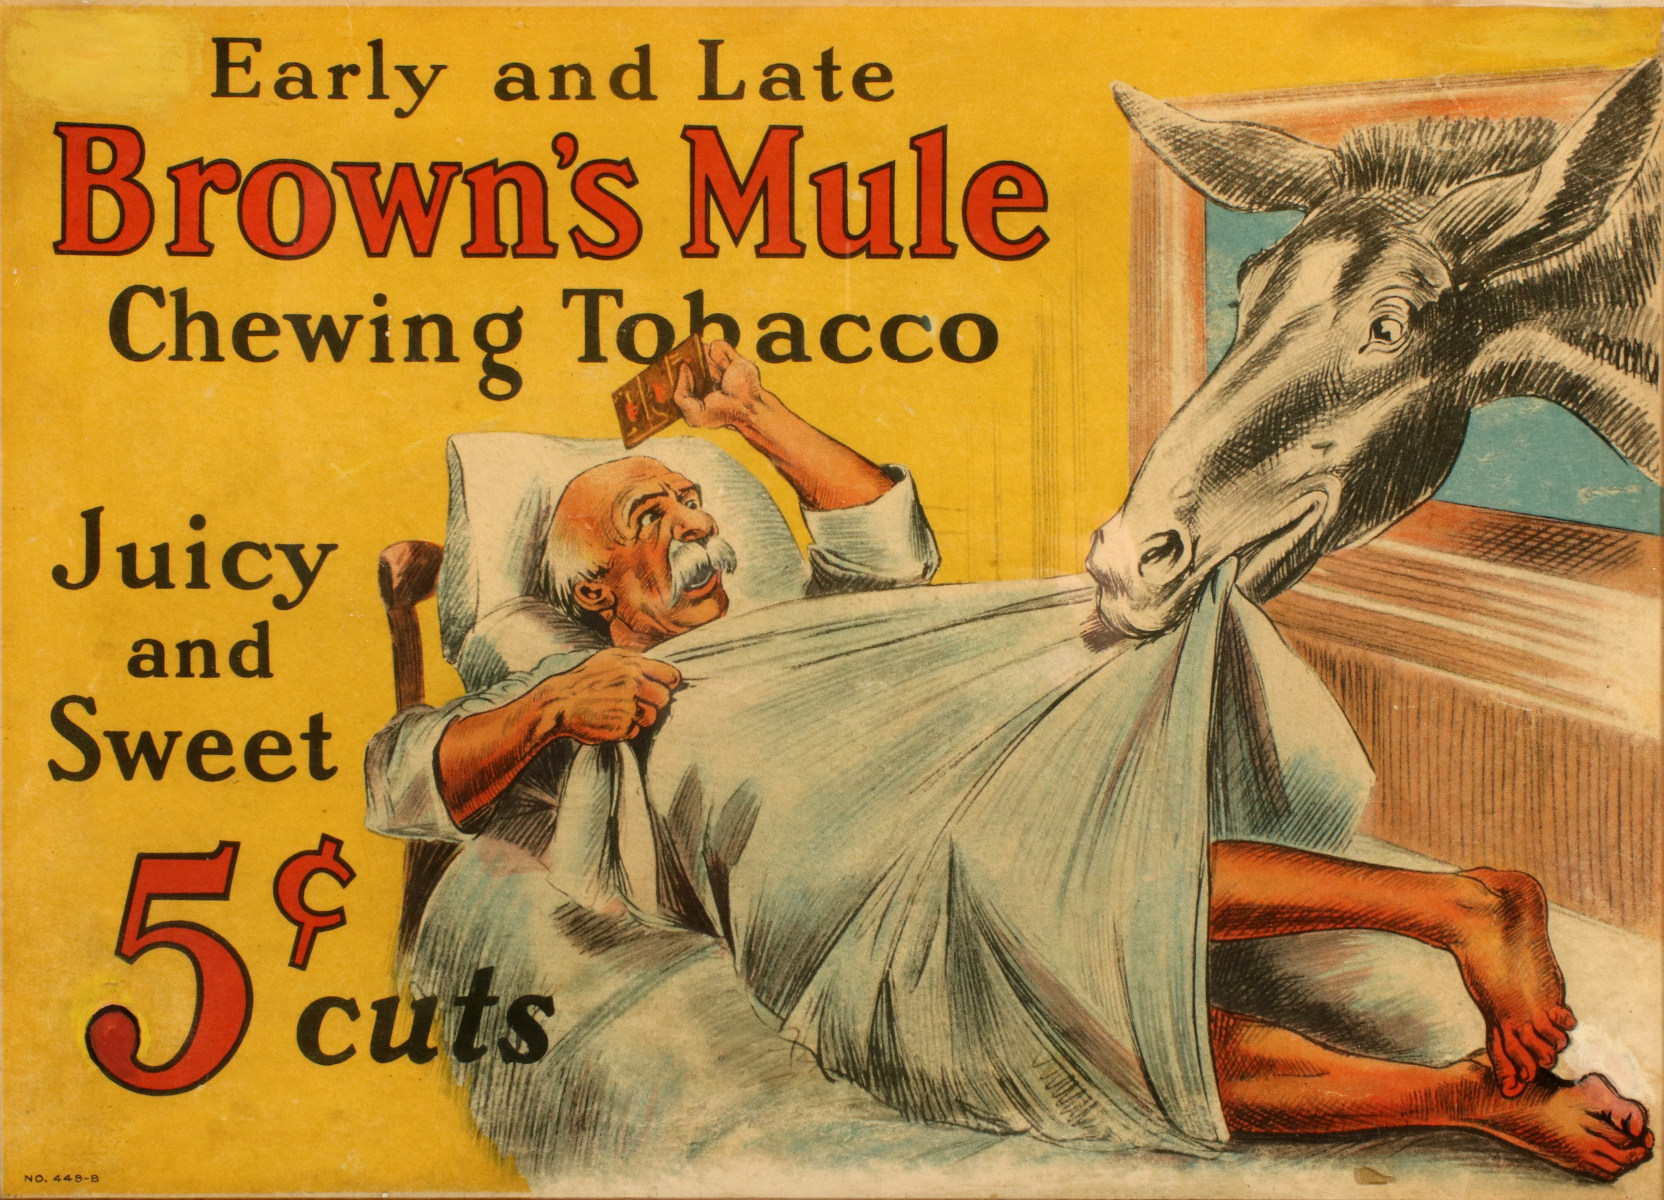 A BROWN'S MULE CHEWING TOBACCO ADVERTISING POSTER